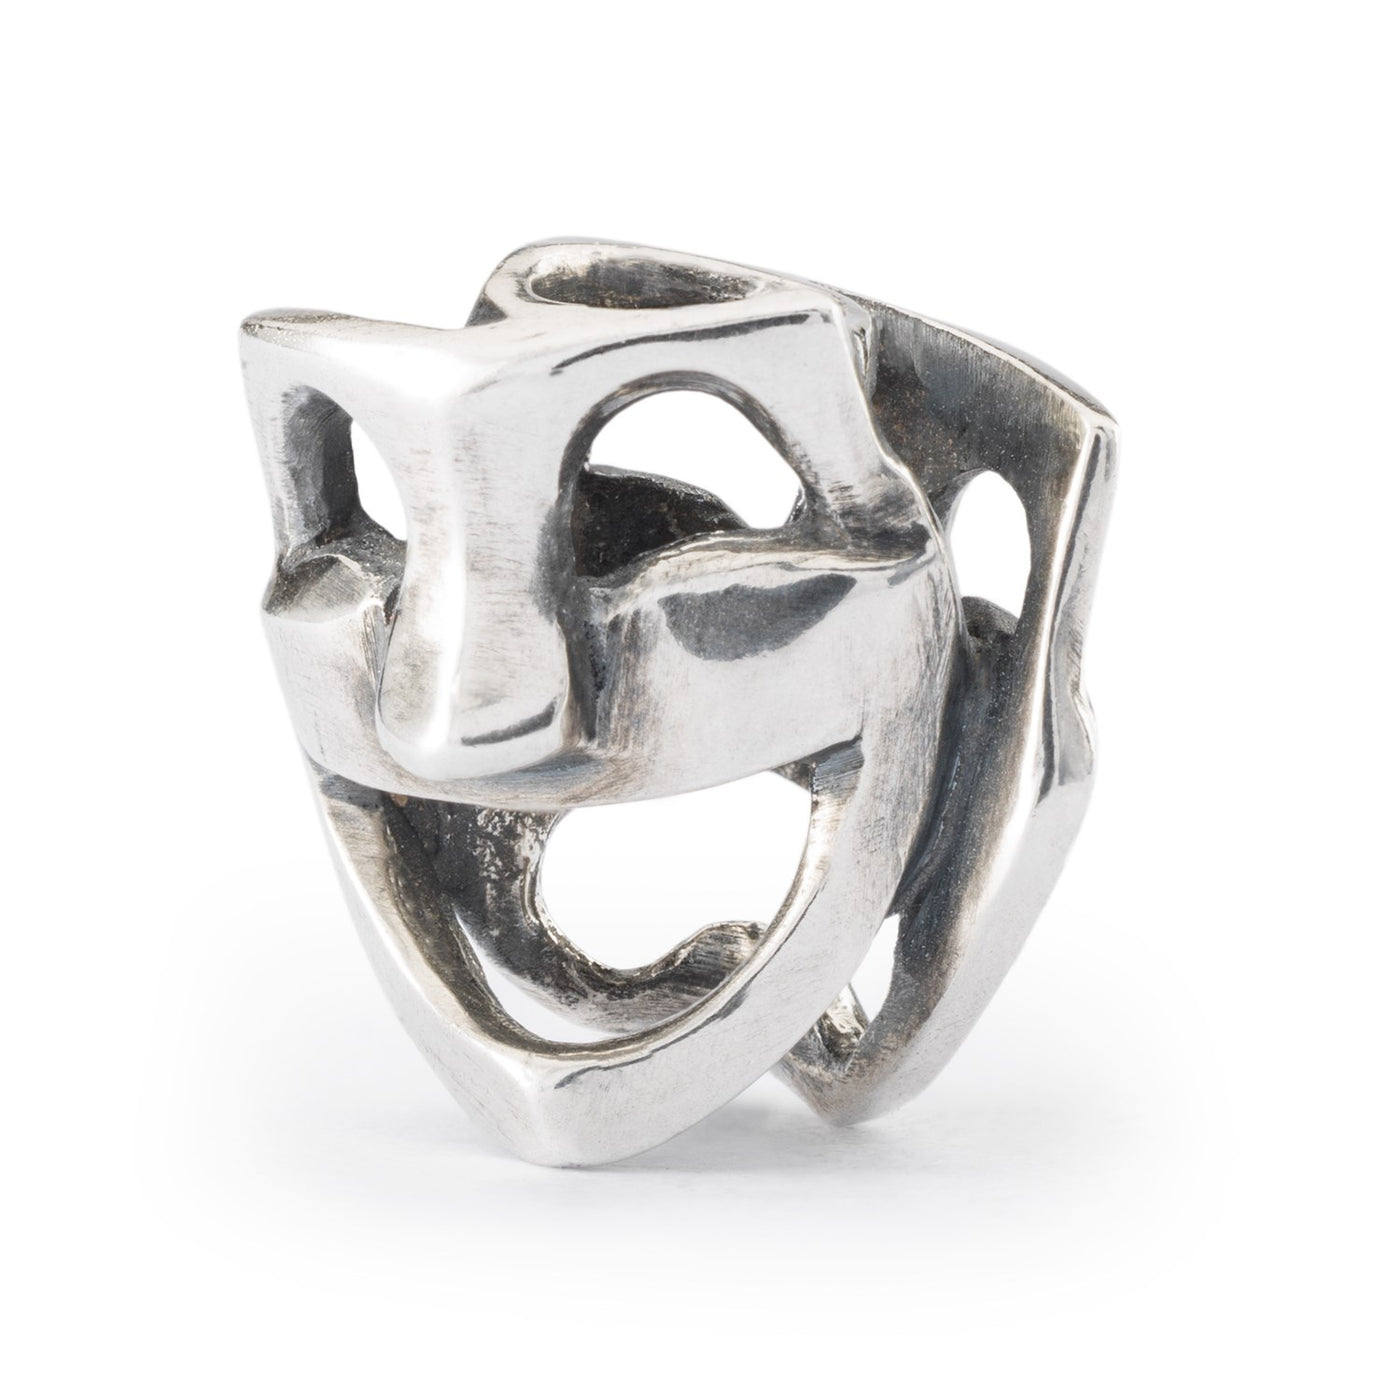 A stunning bead featuring a theater mask design in silver. Adds a touch of drama and art to your bracelet.